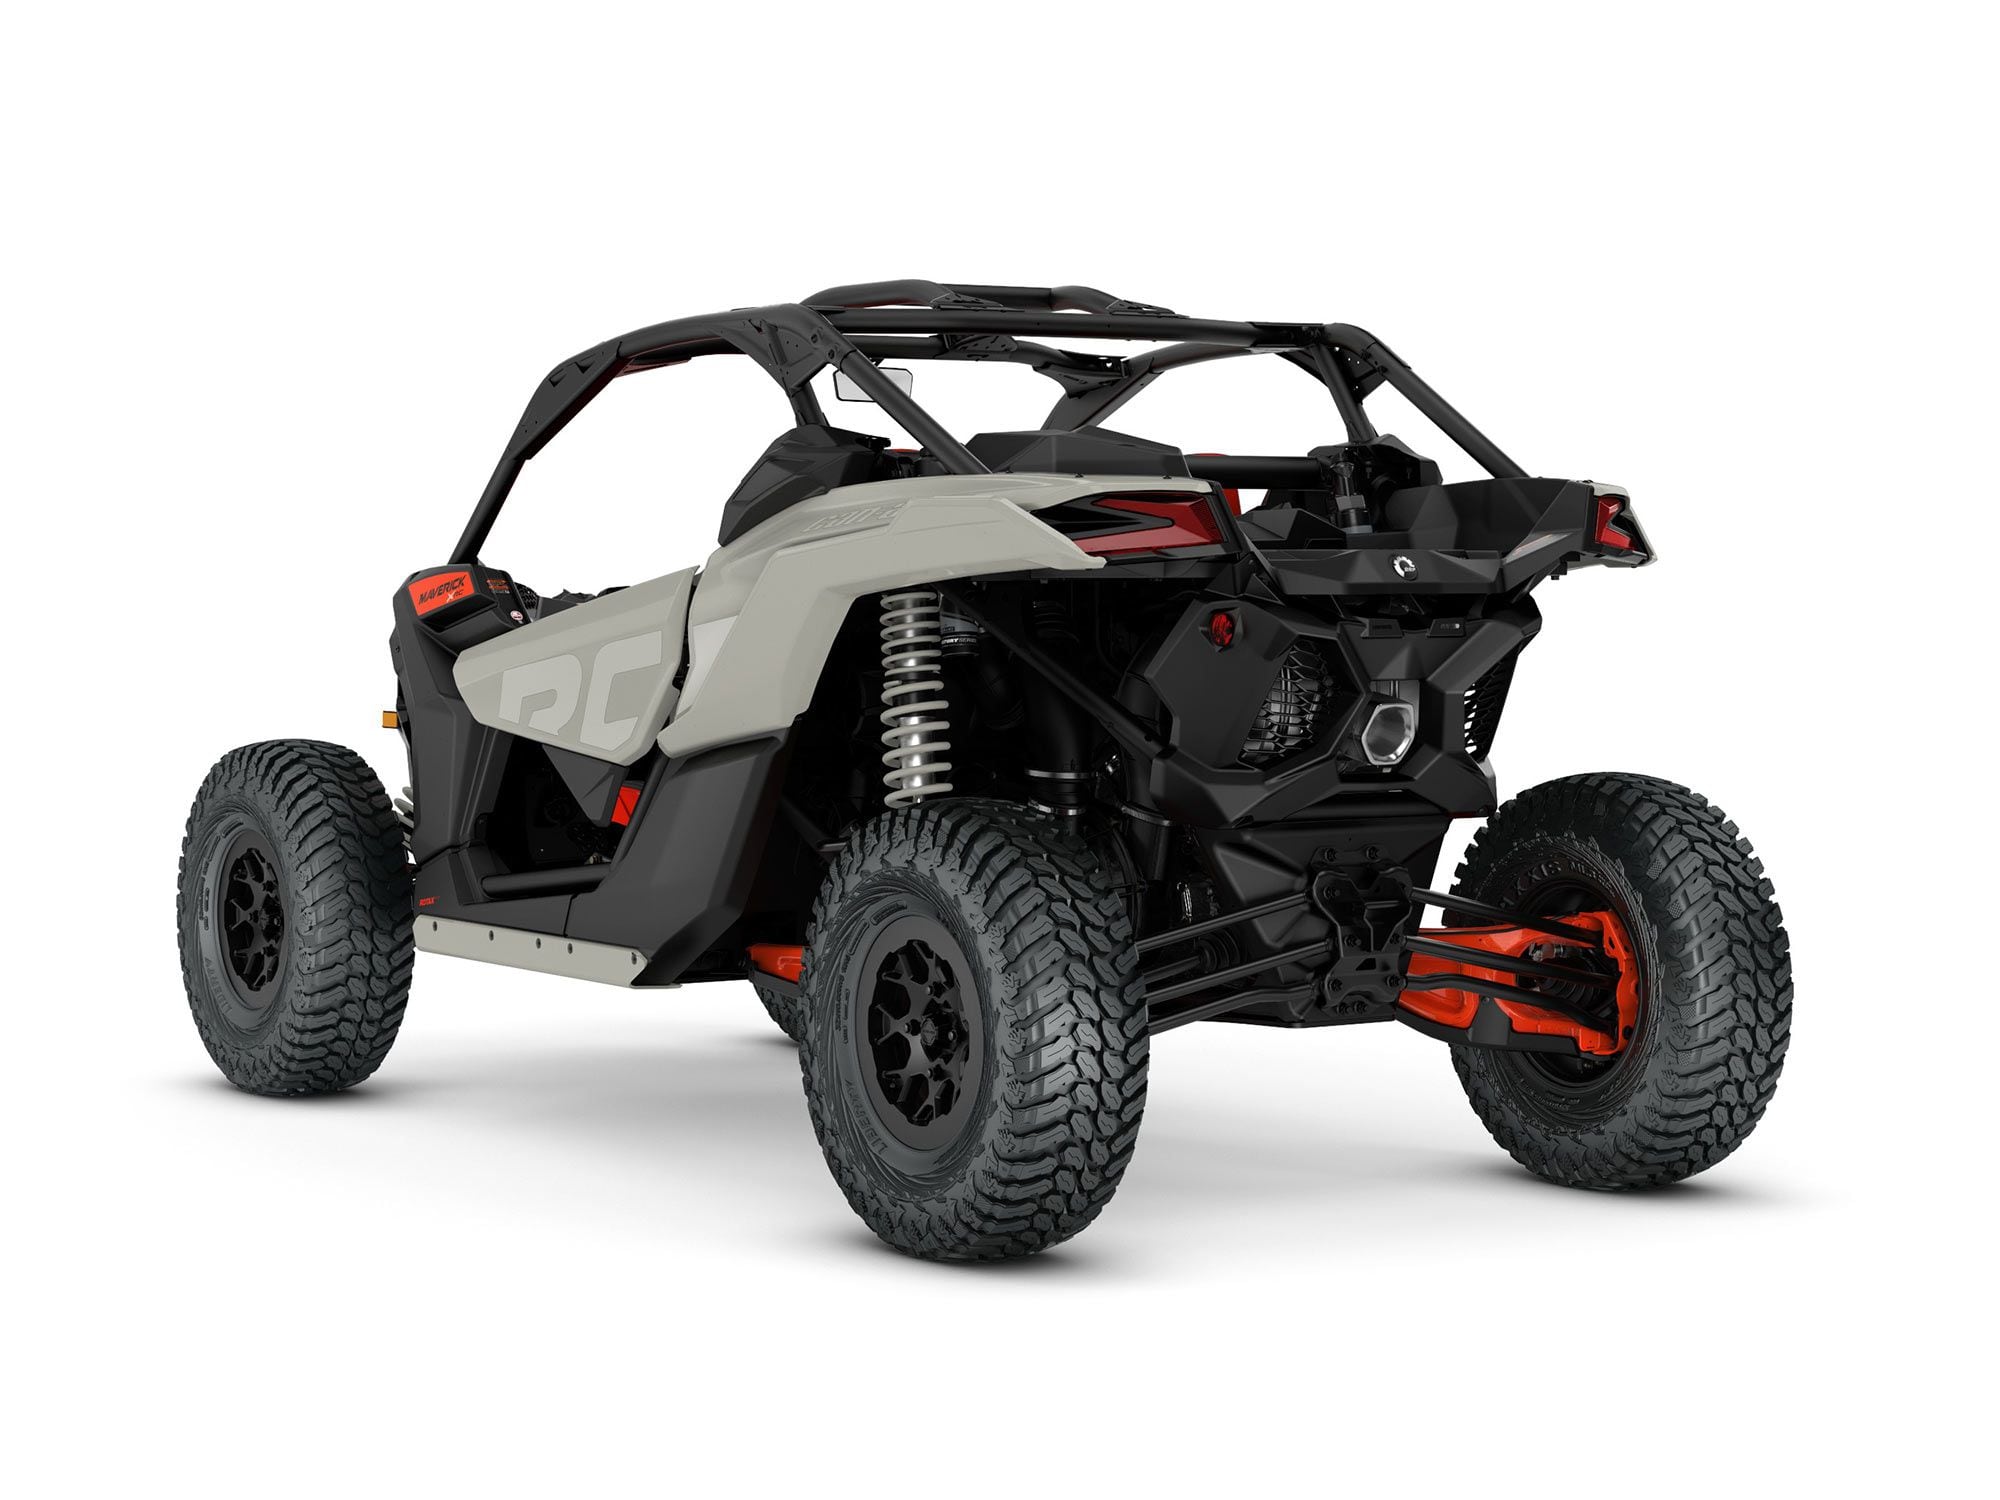 2022 Can-Am Maverick X3 X RC Turbo RR 64 rear view in Chalk Gray and Magma Red color.